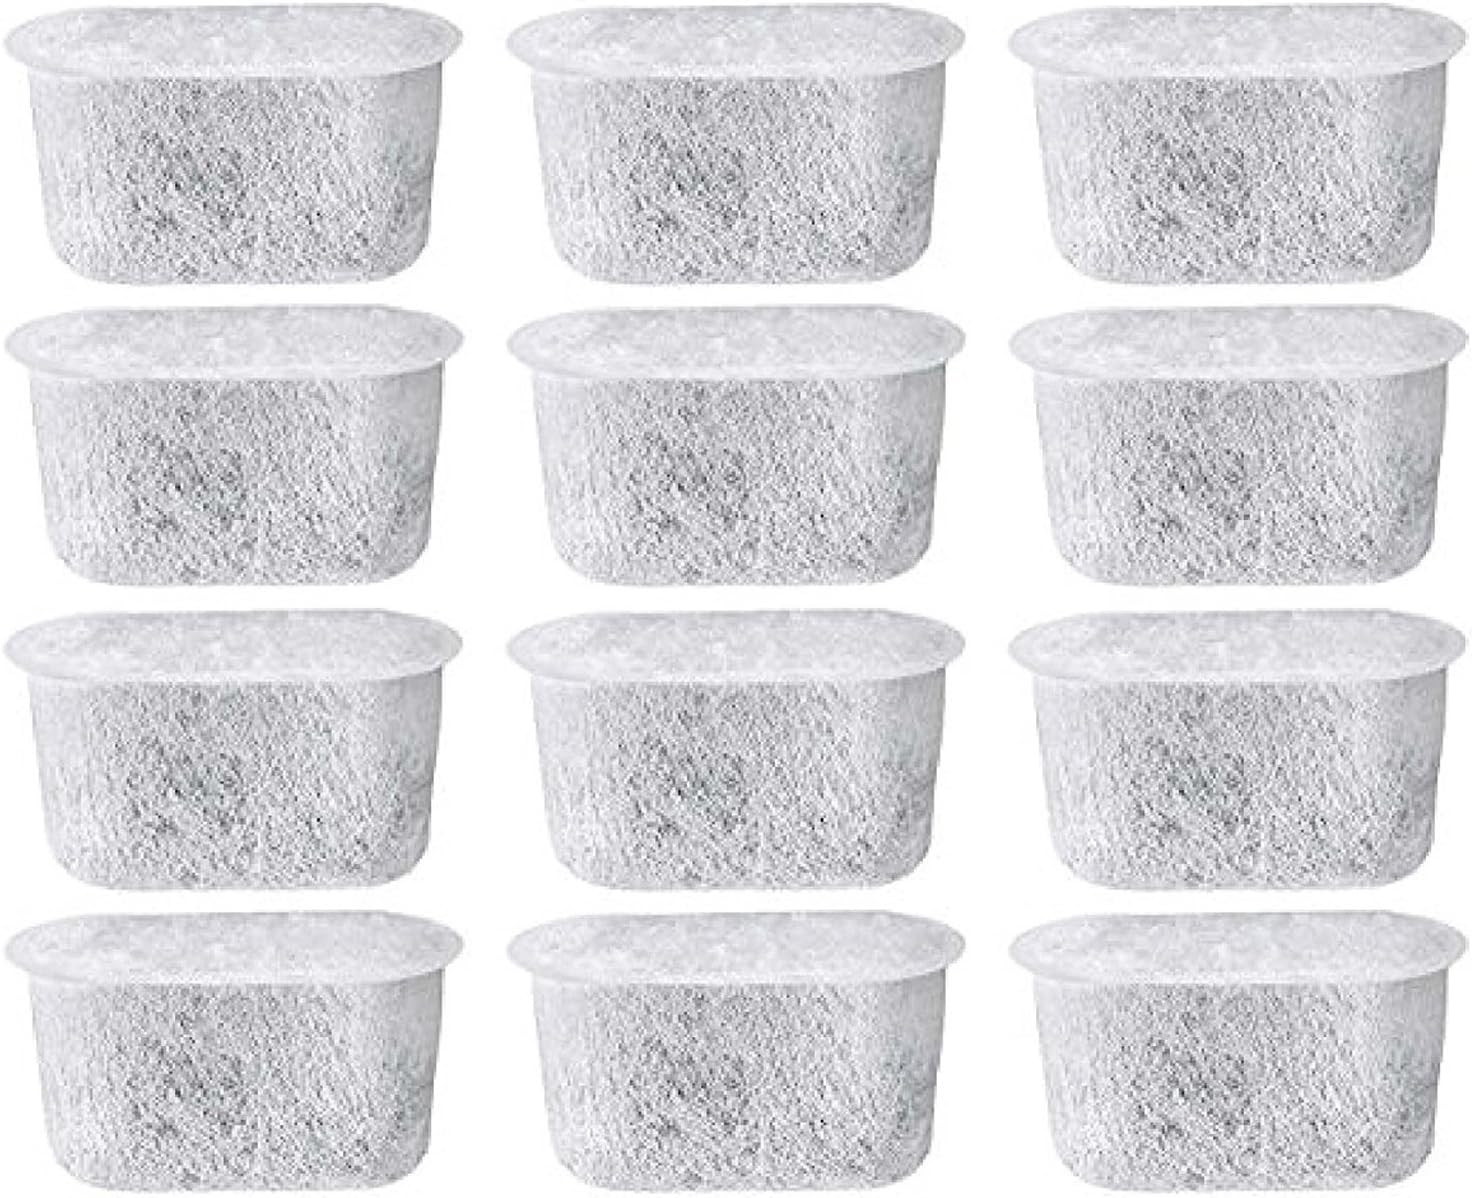 Everyday DCCF-12 Replacement Charcoal Water Filters for Cuisinart Coffee Makers, 12-Pack